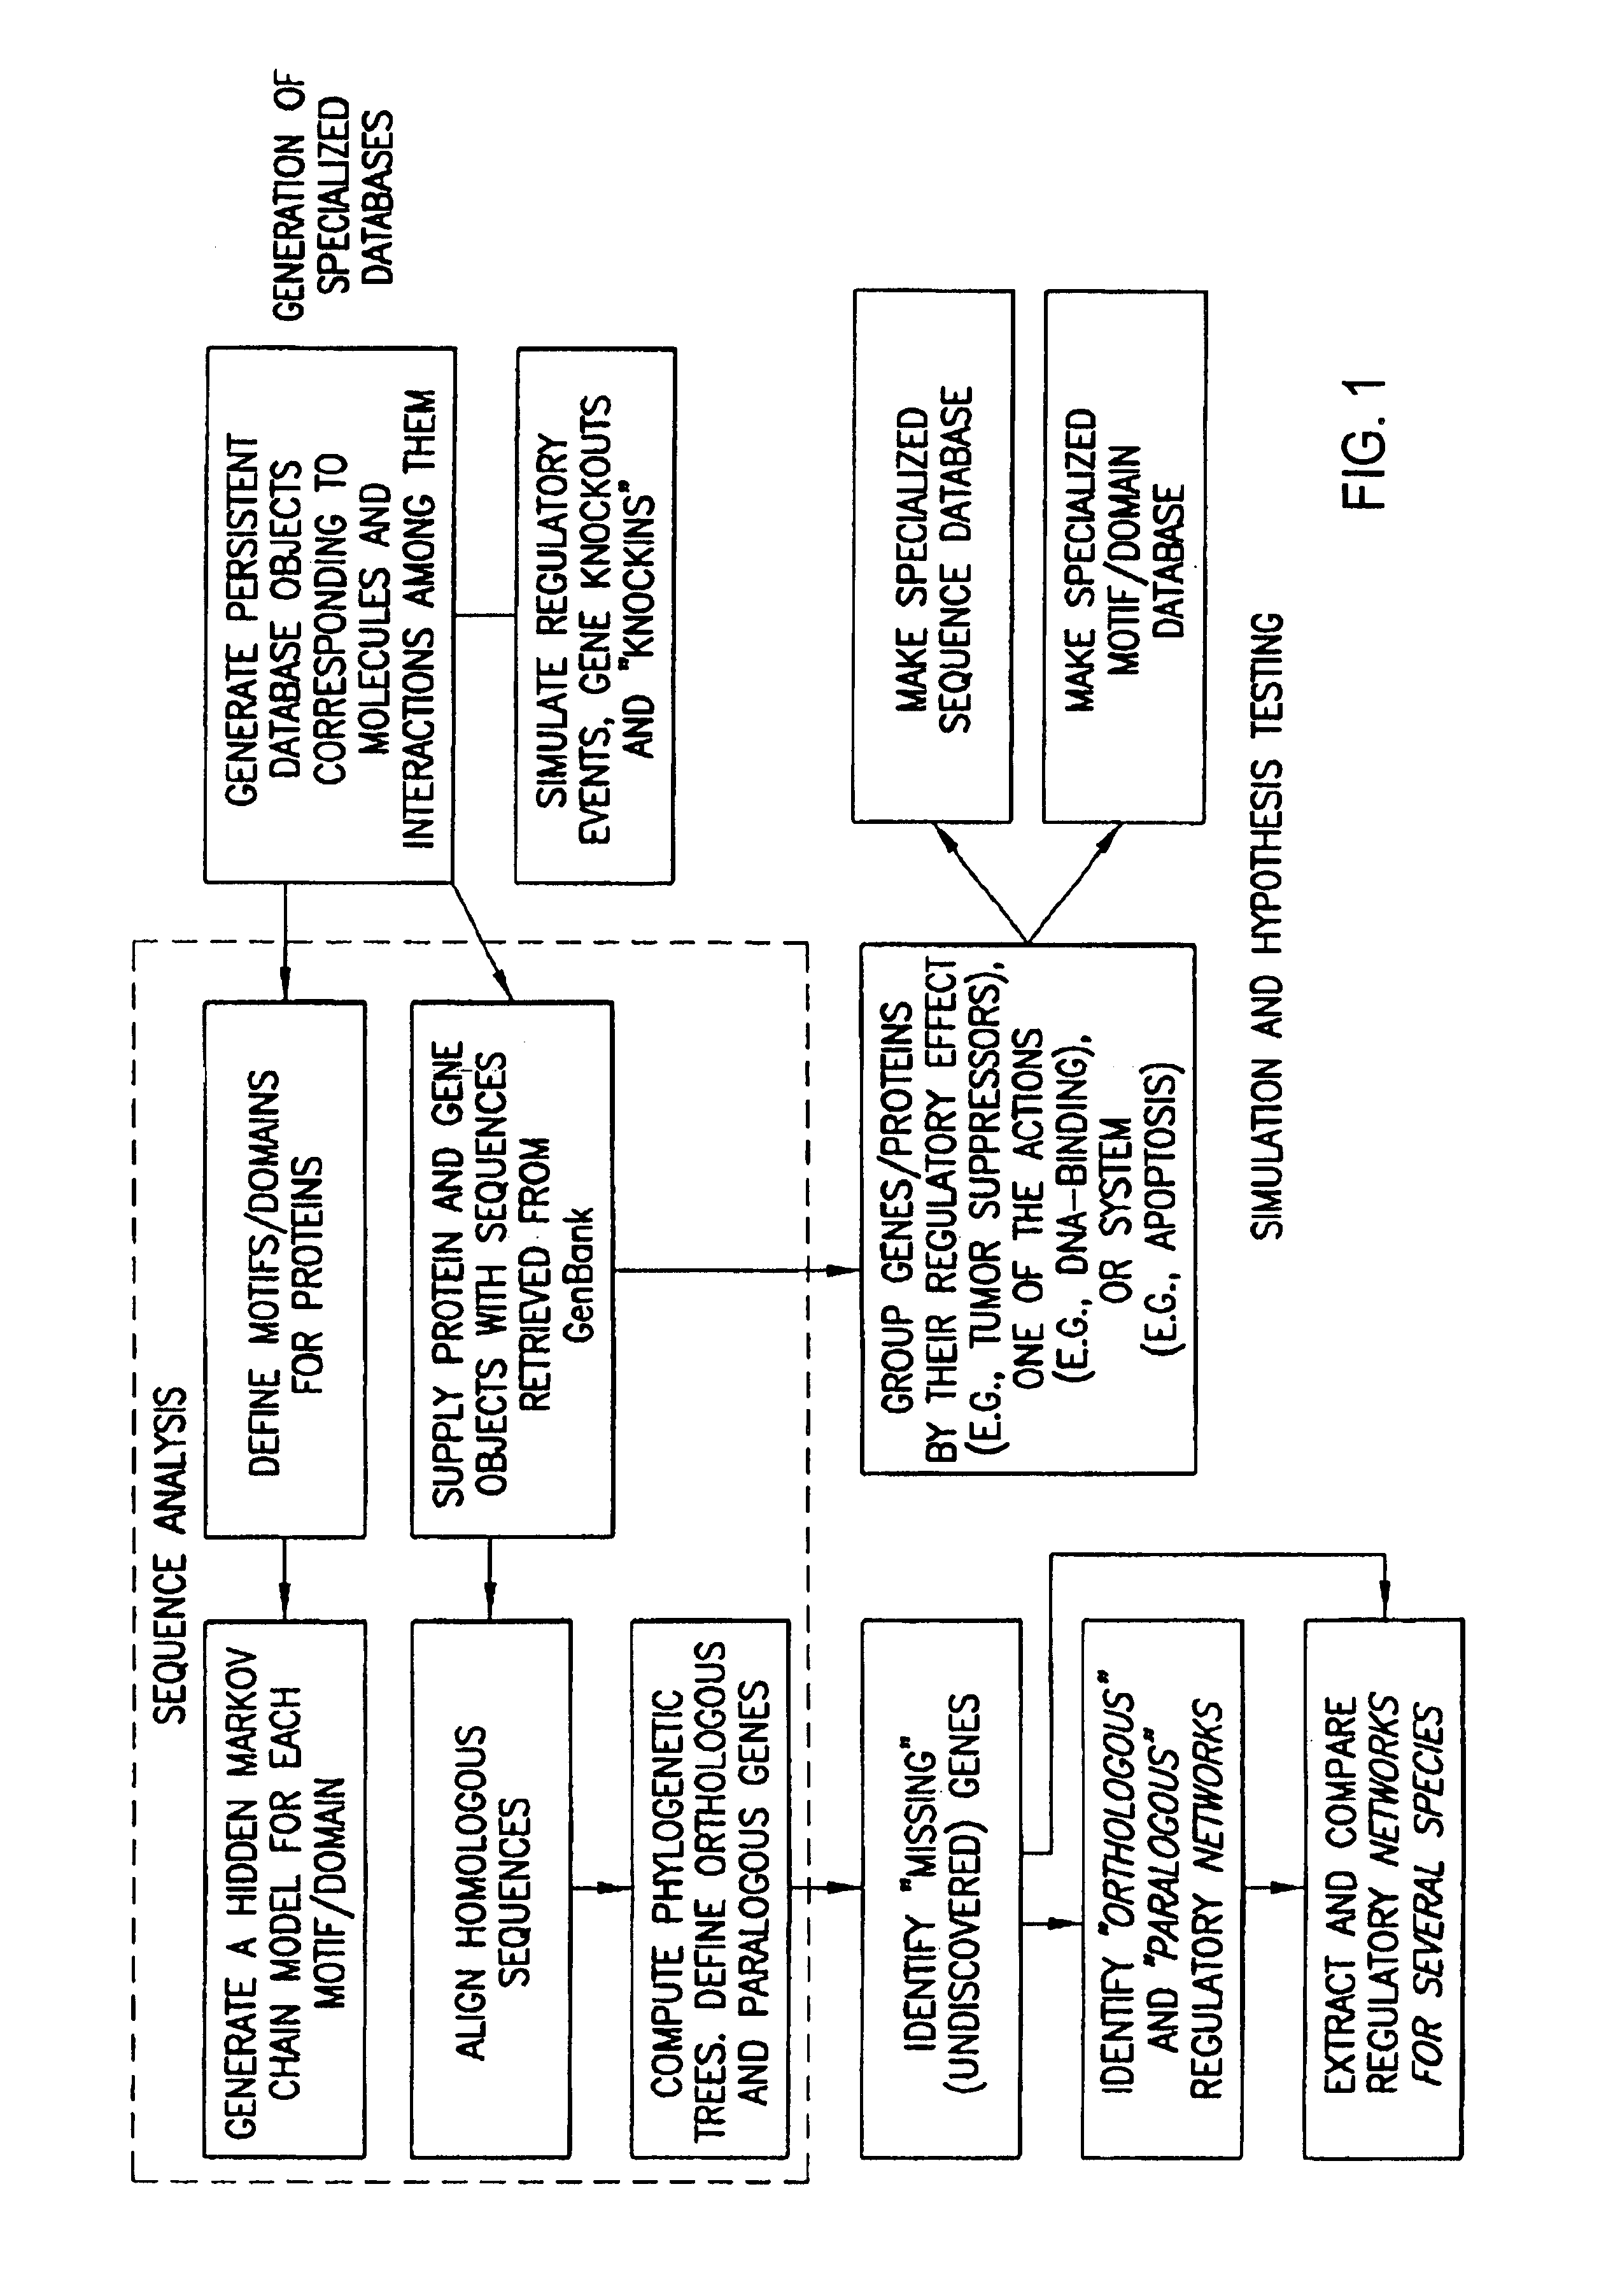 Methods for extracting information on interactions between biological entities from natural language text data